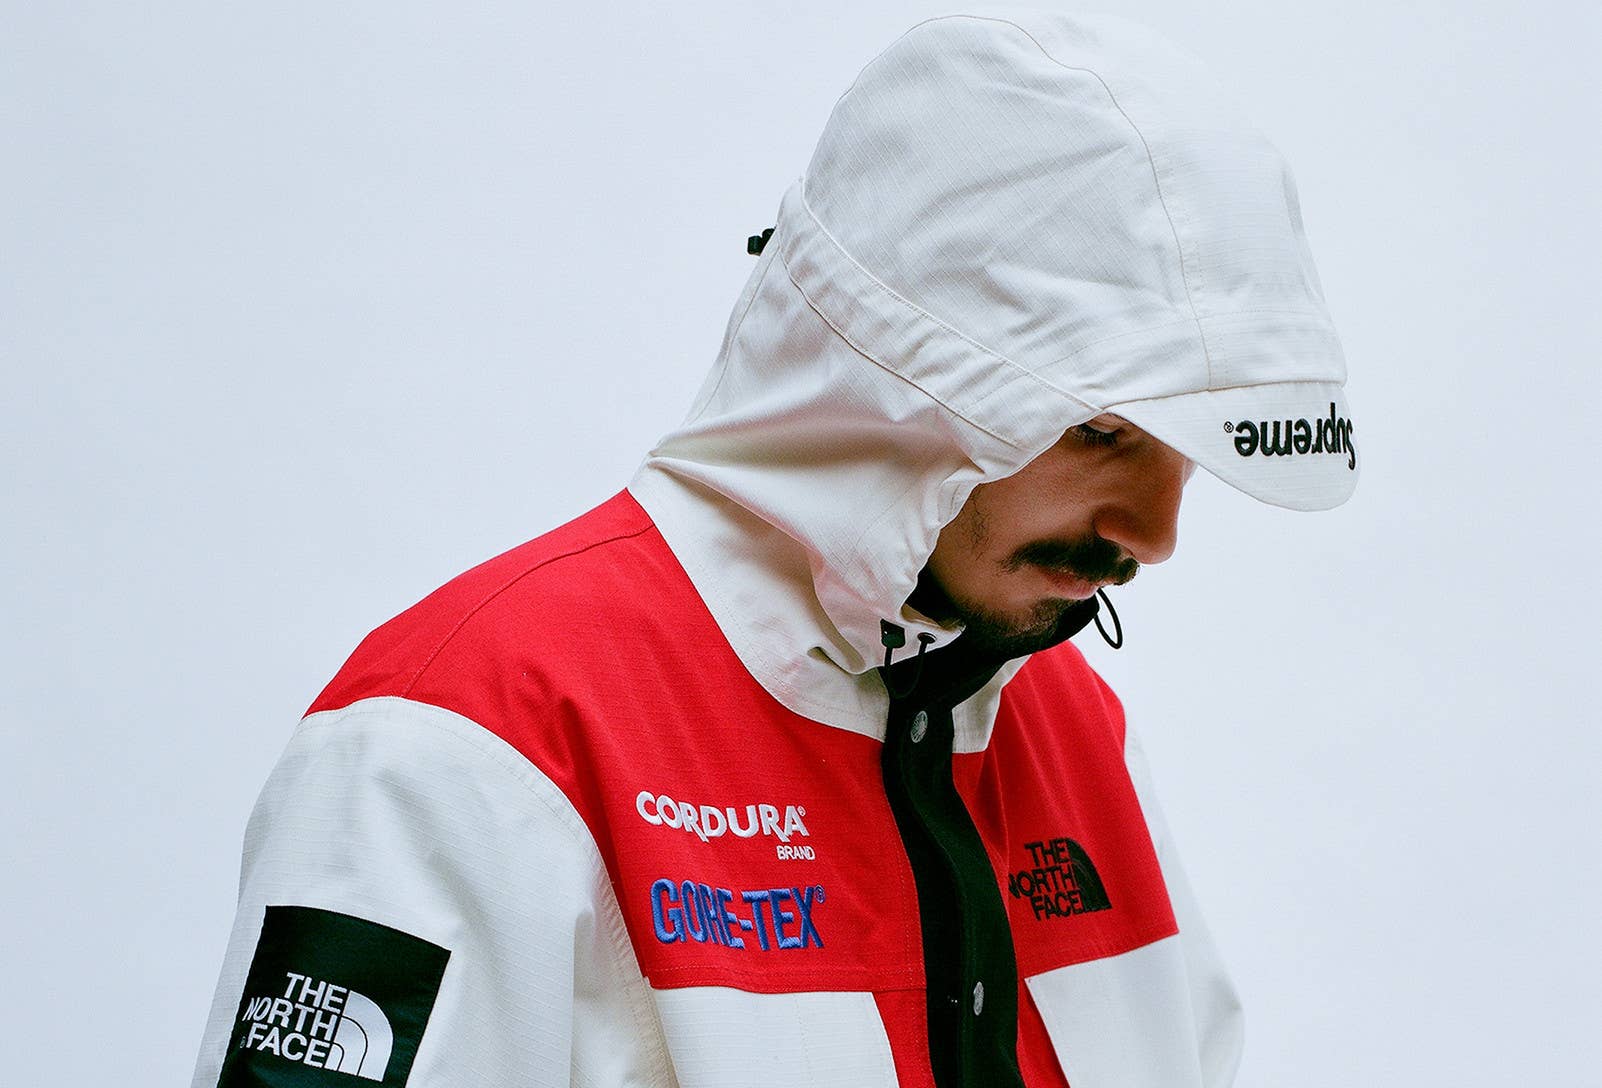 Supreme Launches Fall 2018 Collection With North Face